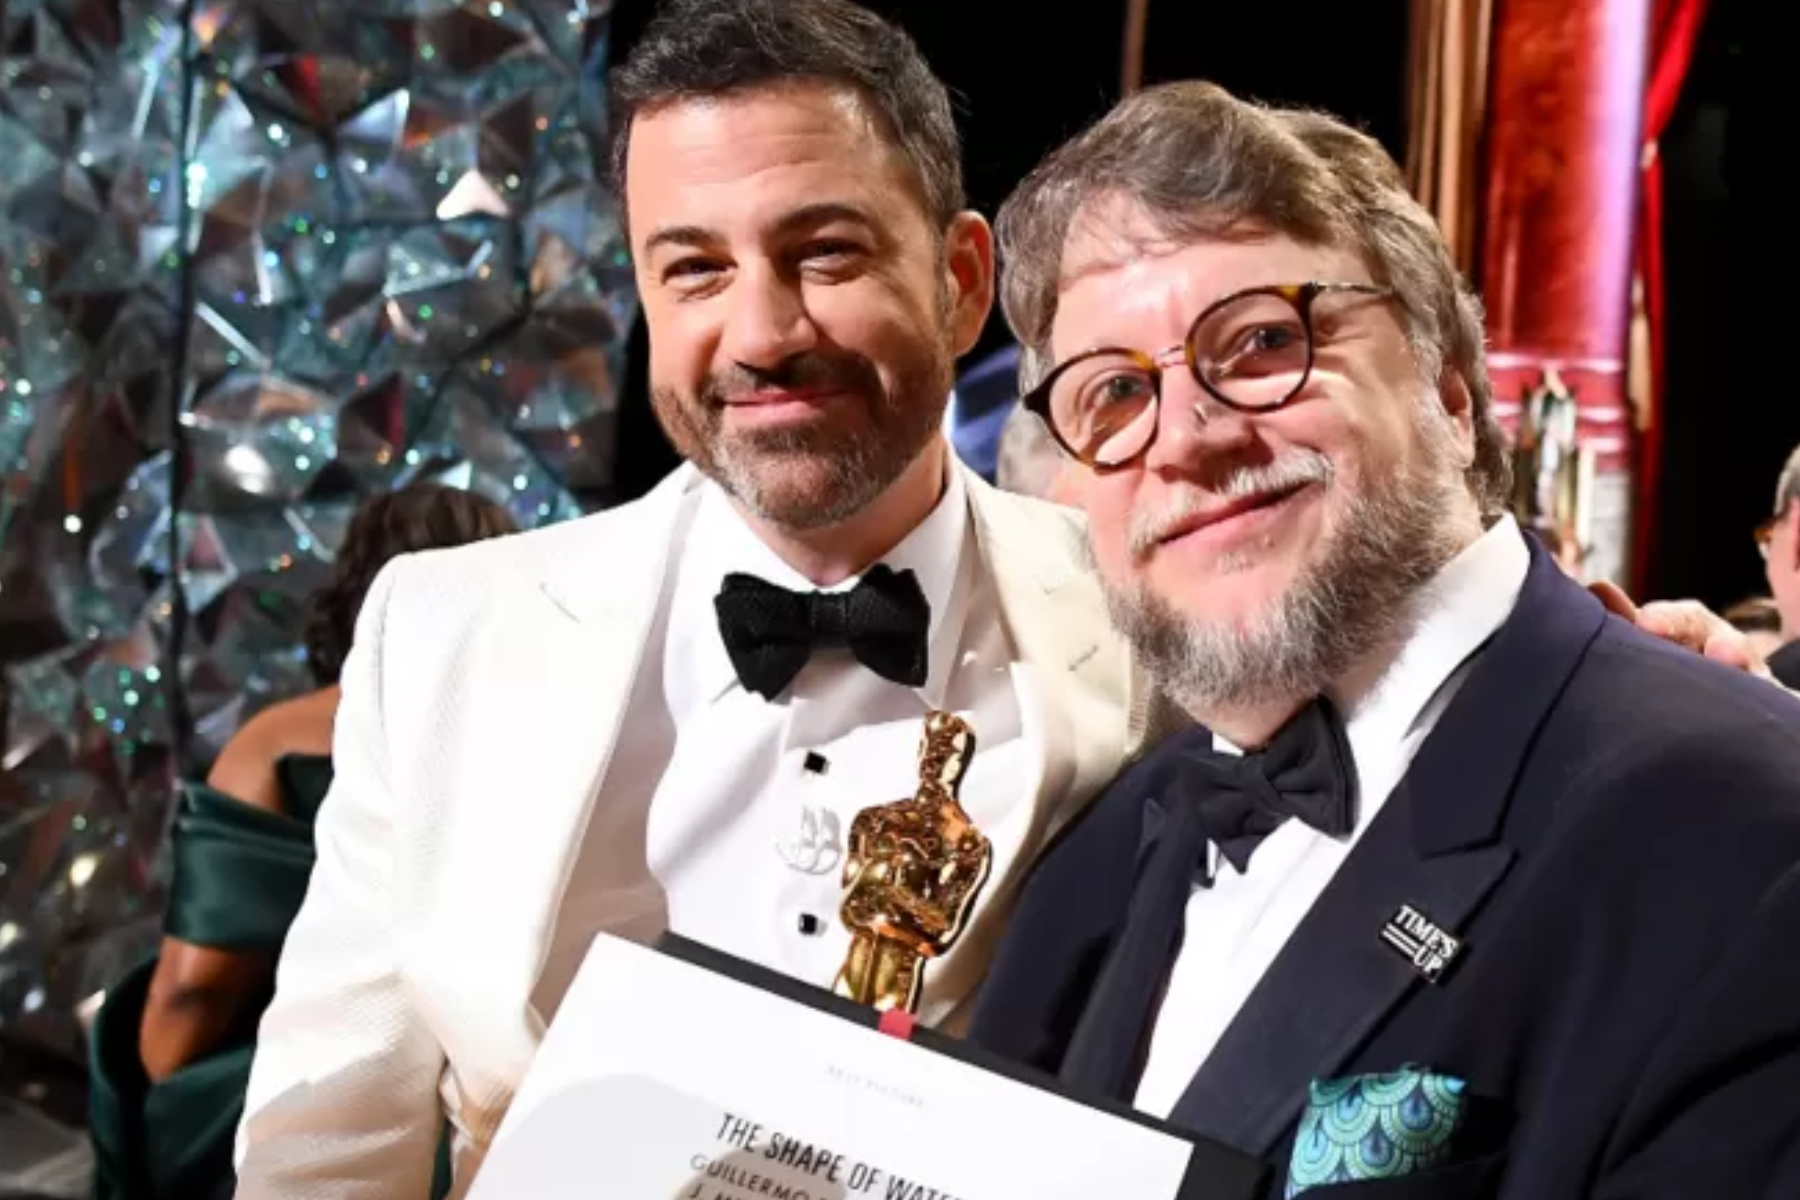 Jimmy Kimmel (left) last hosted the Oscars in 2018, when Guillermo del Toro's The Shape of Water won best picture